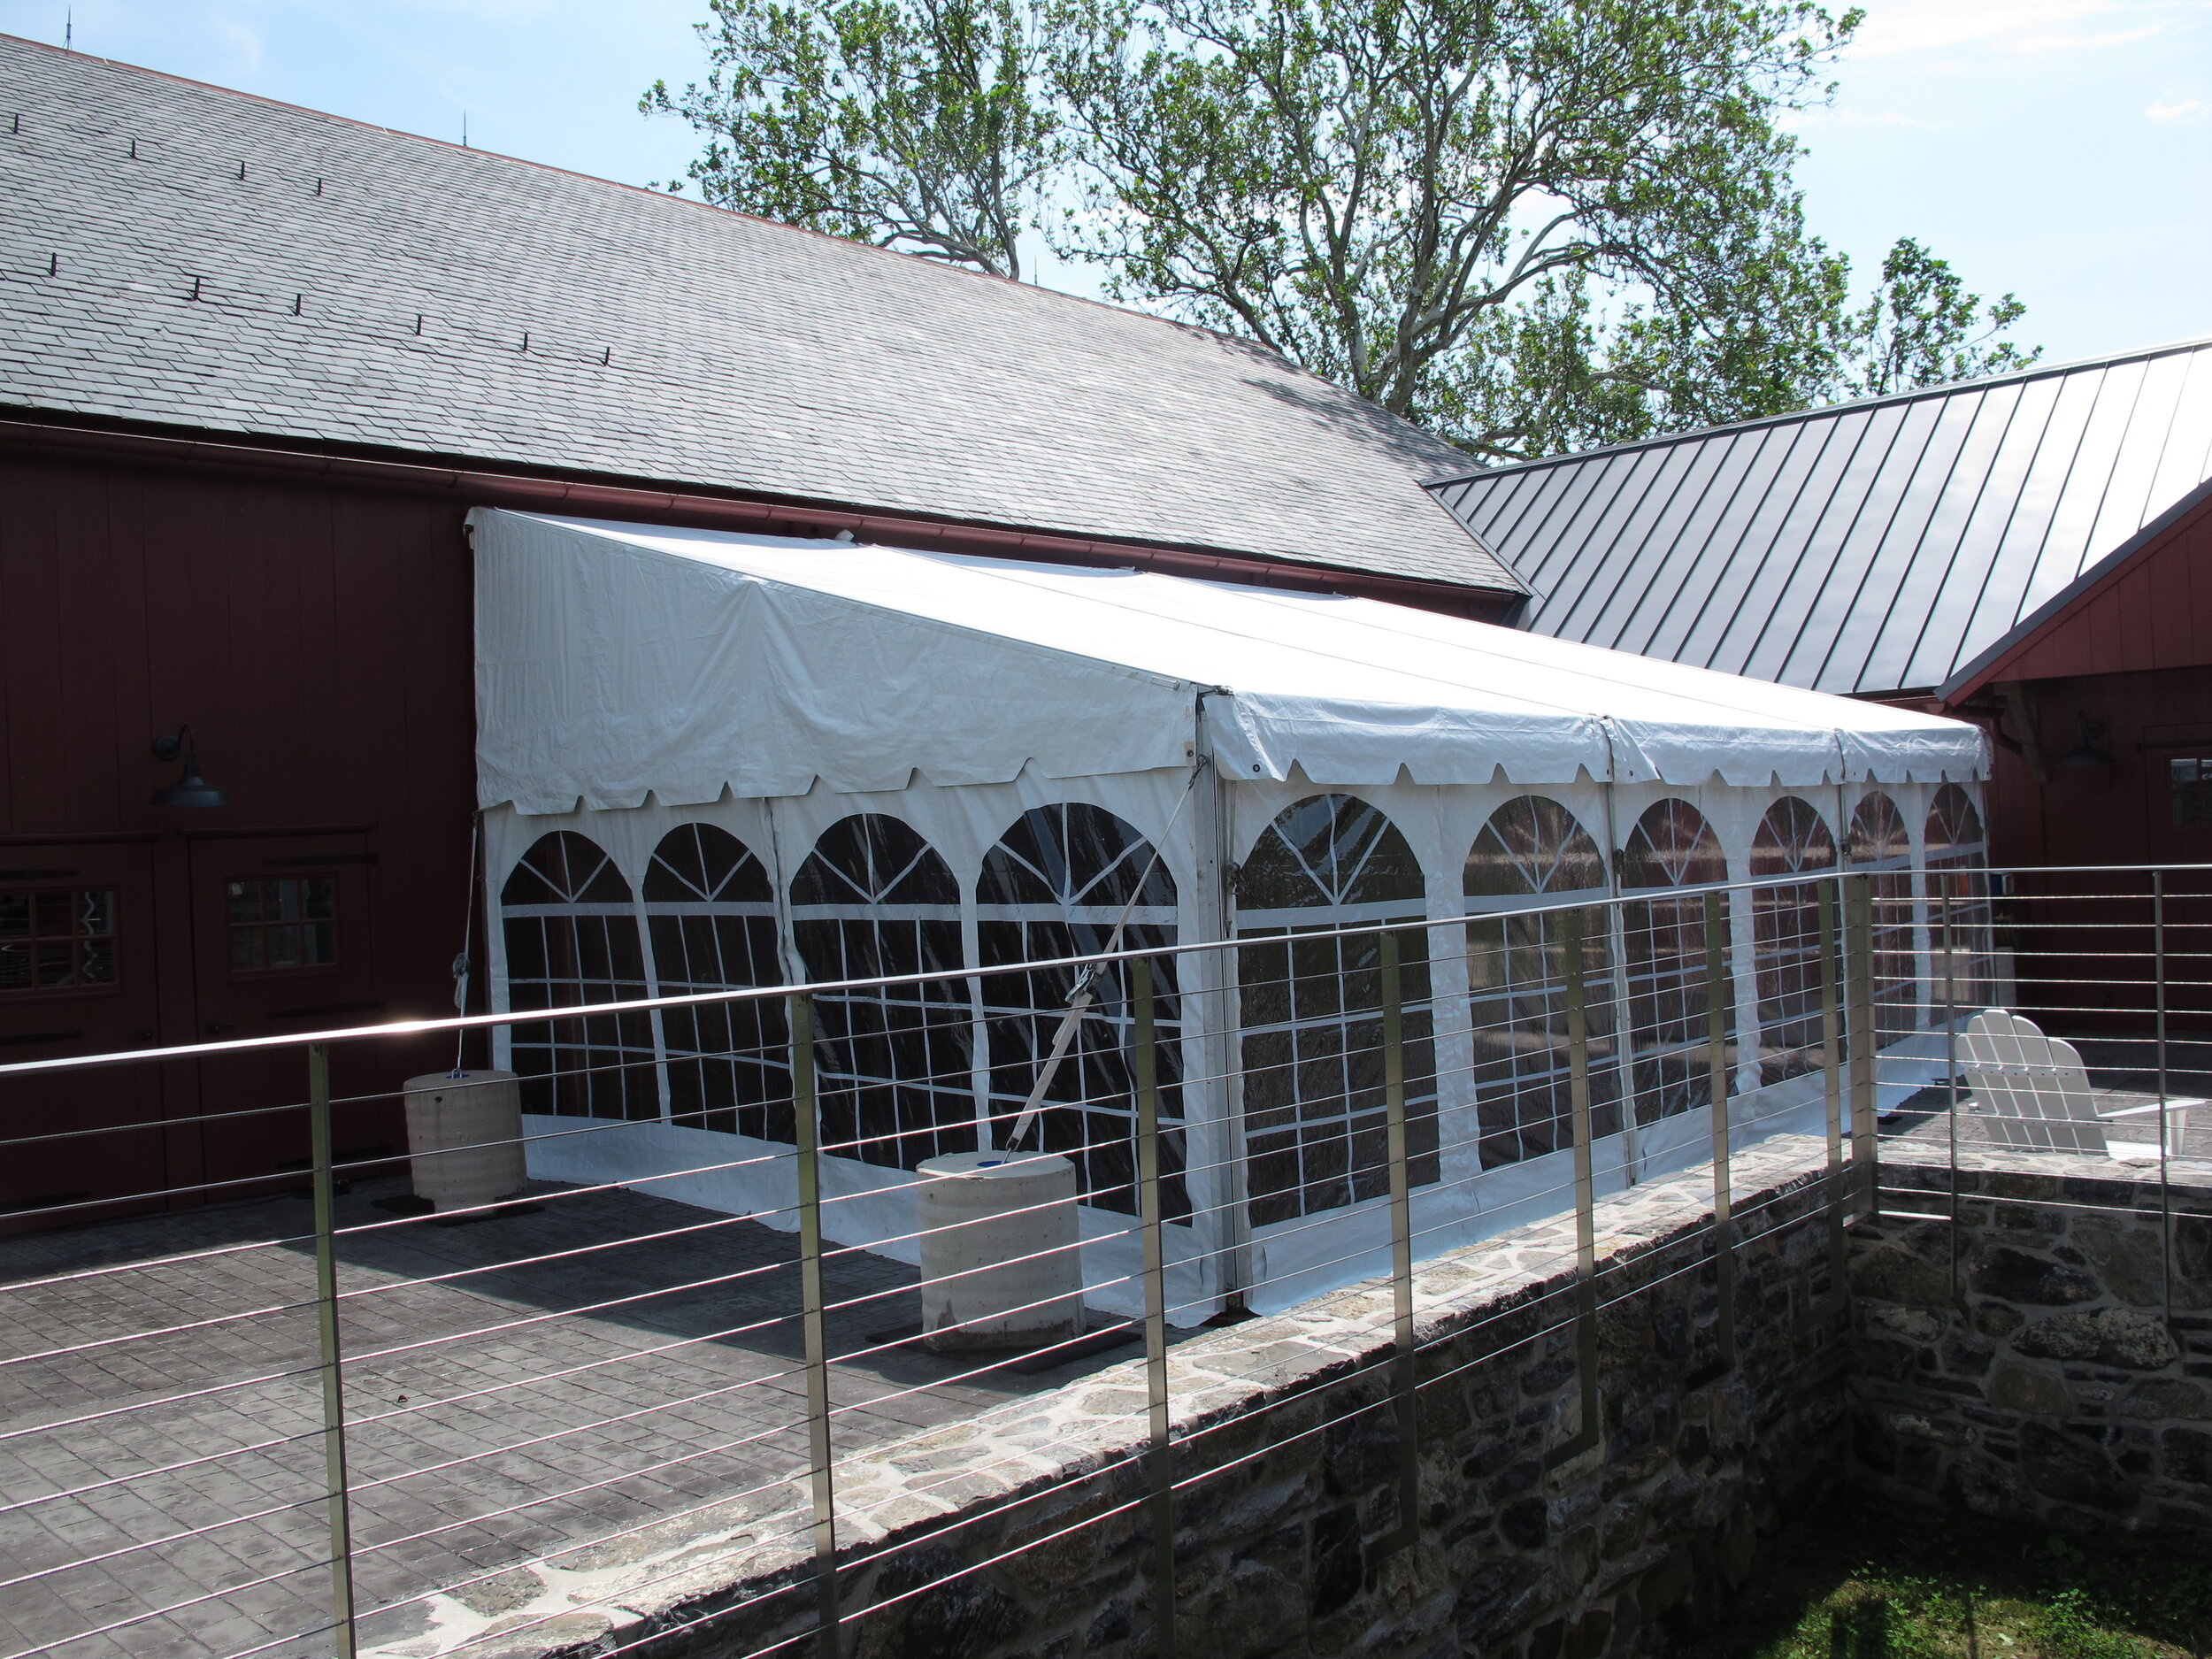 Outdoor dining pavilion